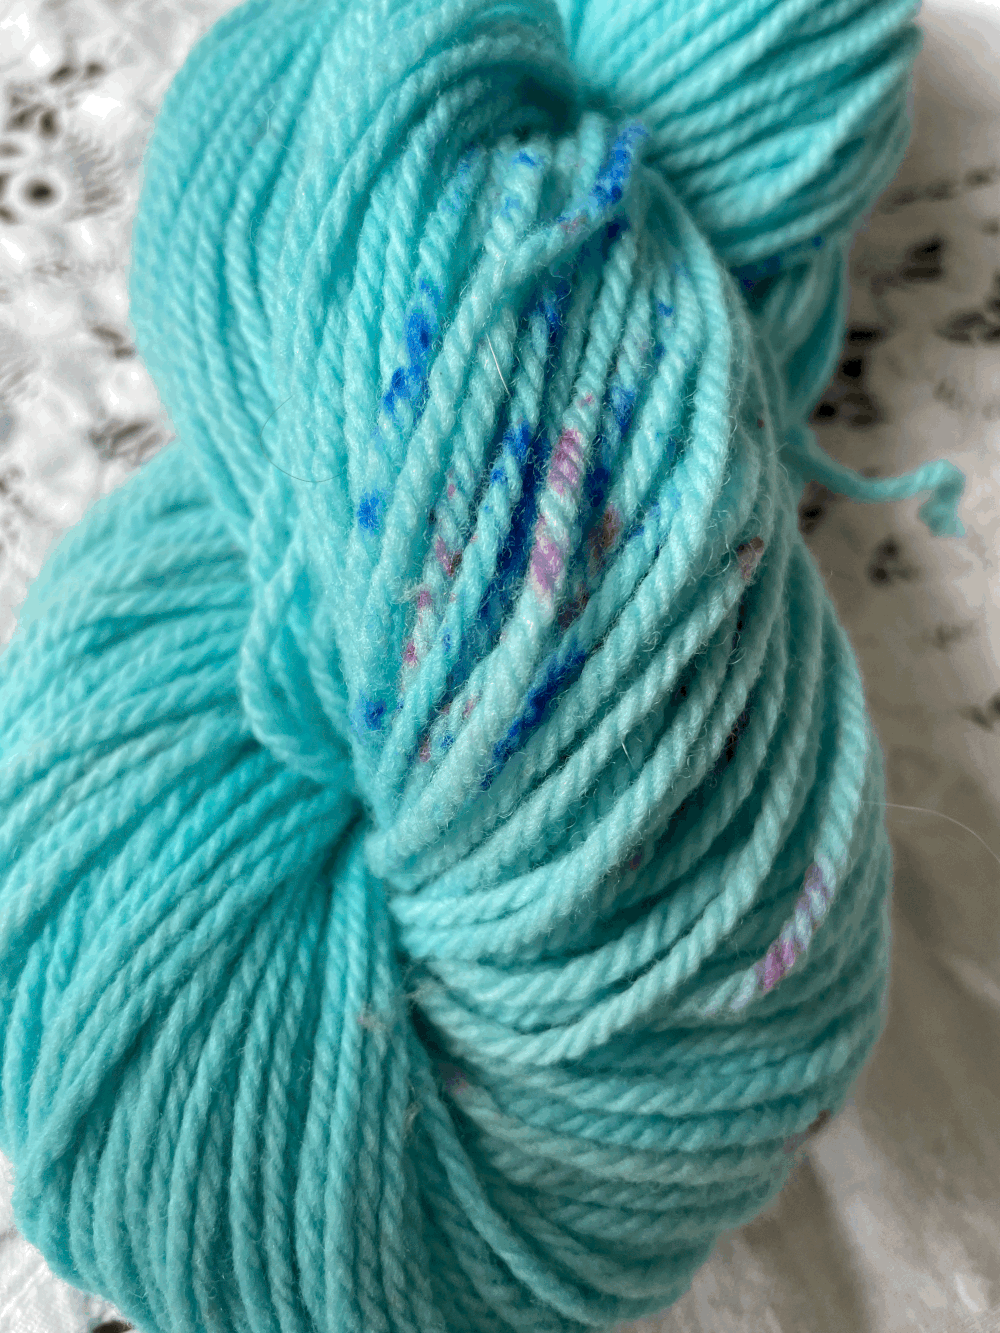 Yarn Subscription- Cottage Industry Supporting- Knitting Subscription Box -  Online Yarn and Spinning Fiber Store-Monthly Subscriptions-Hand Dyed Yarn-Crafty  Housewife Yarns & Fiber Arts